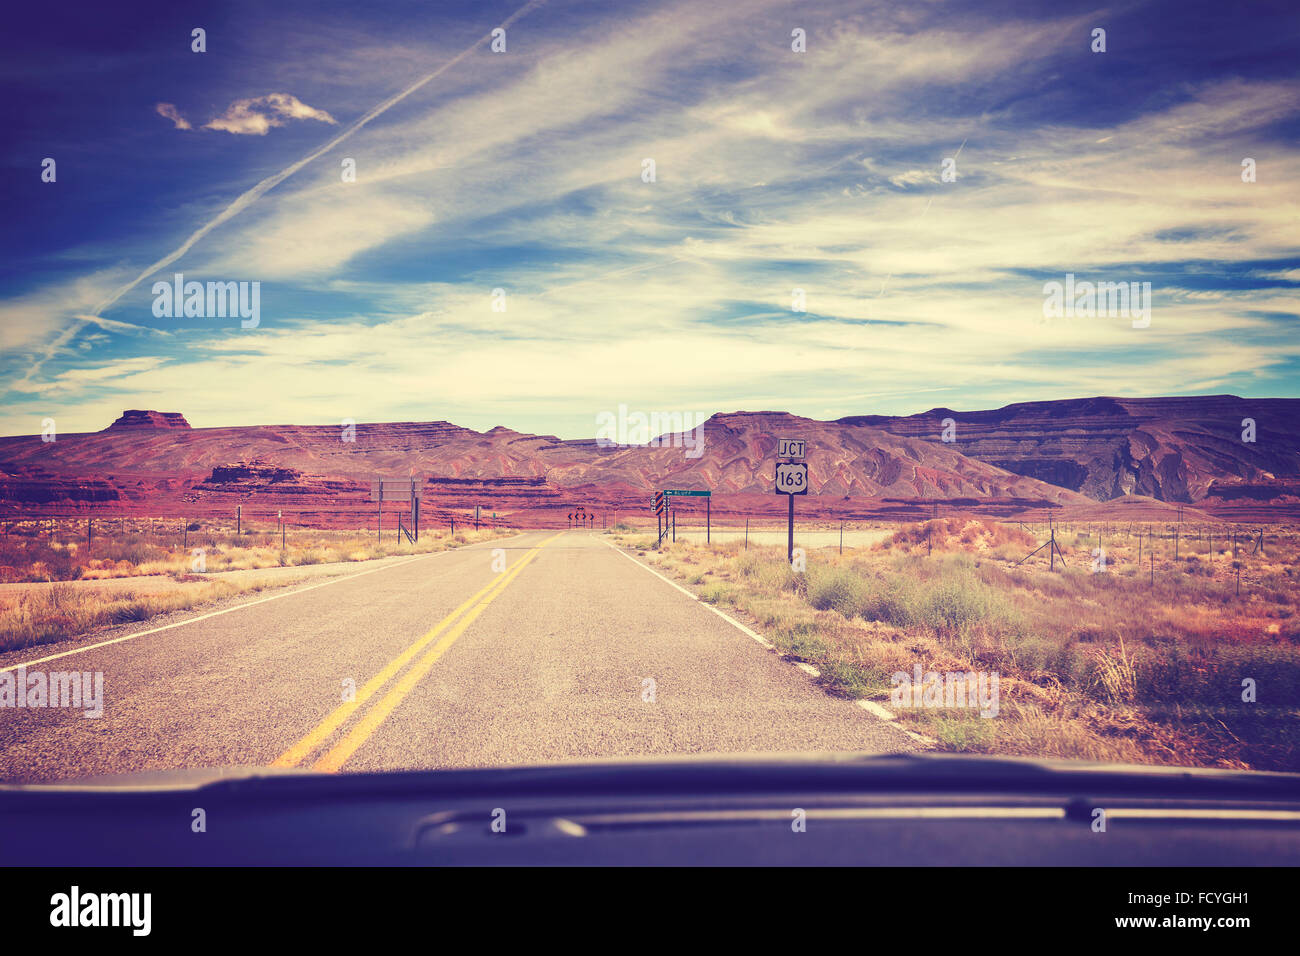 Vintage filtered road, photo taken from the front seat of a car, travel concept, USA. Stock Photo